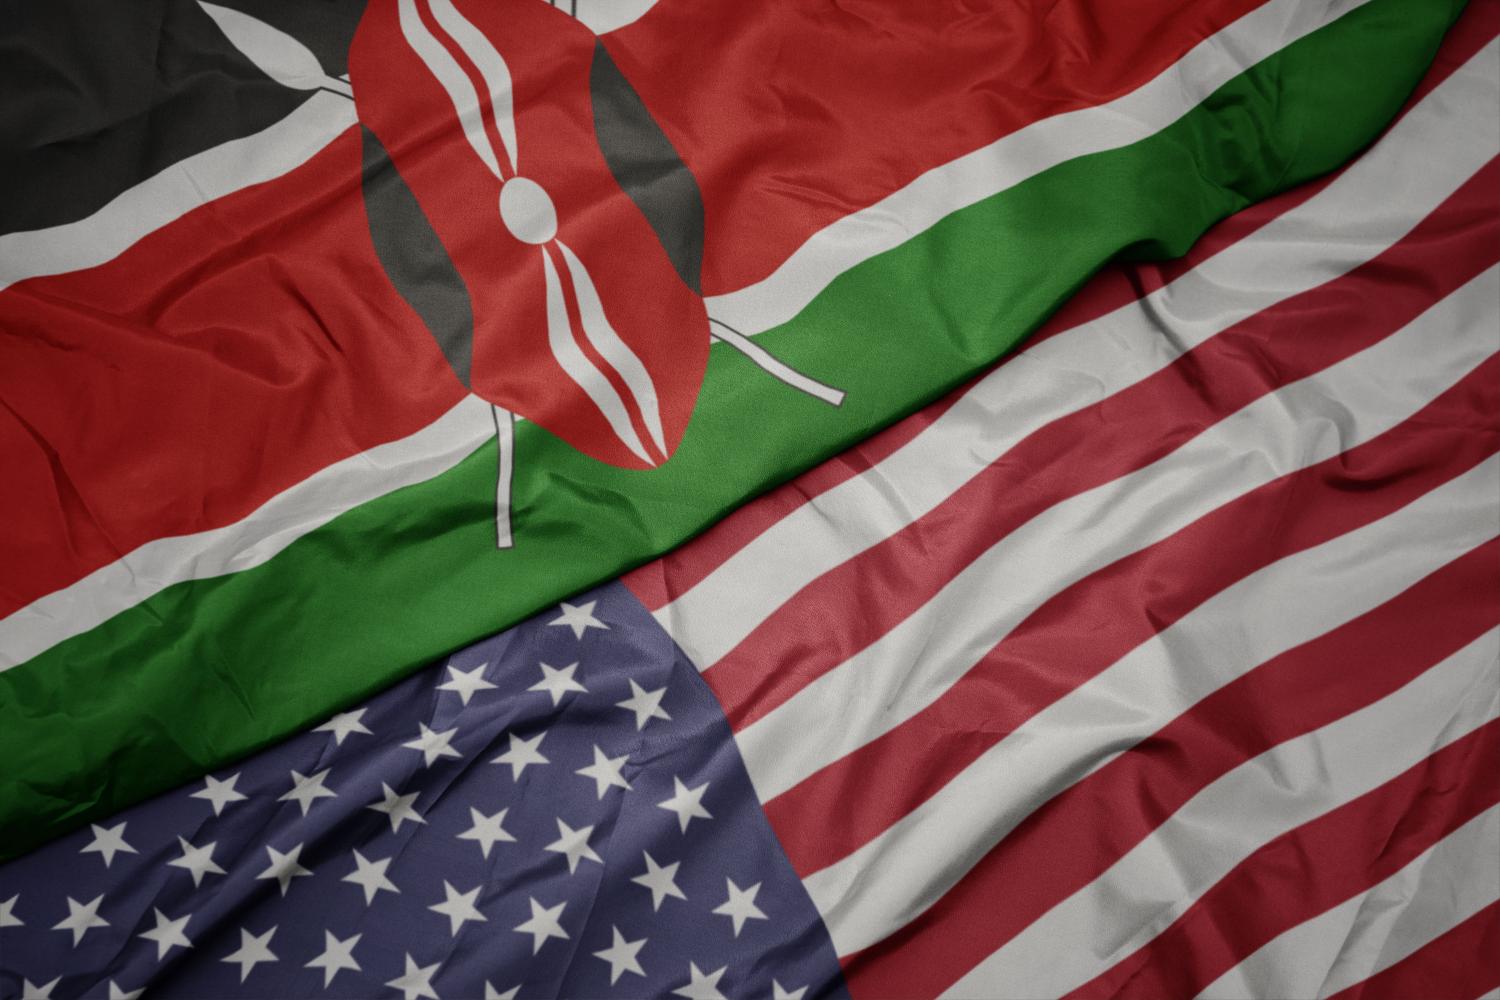 Flags of Kenya and the United States